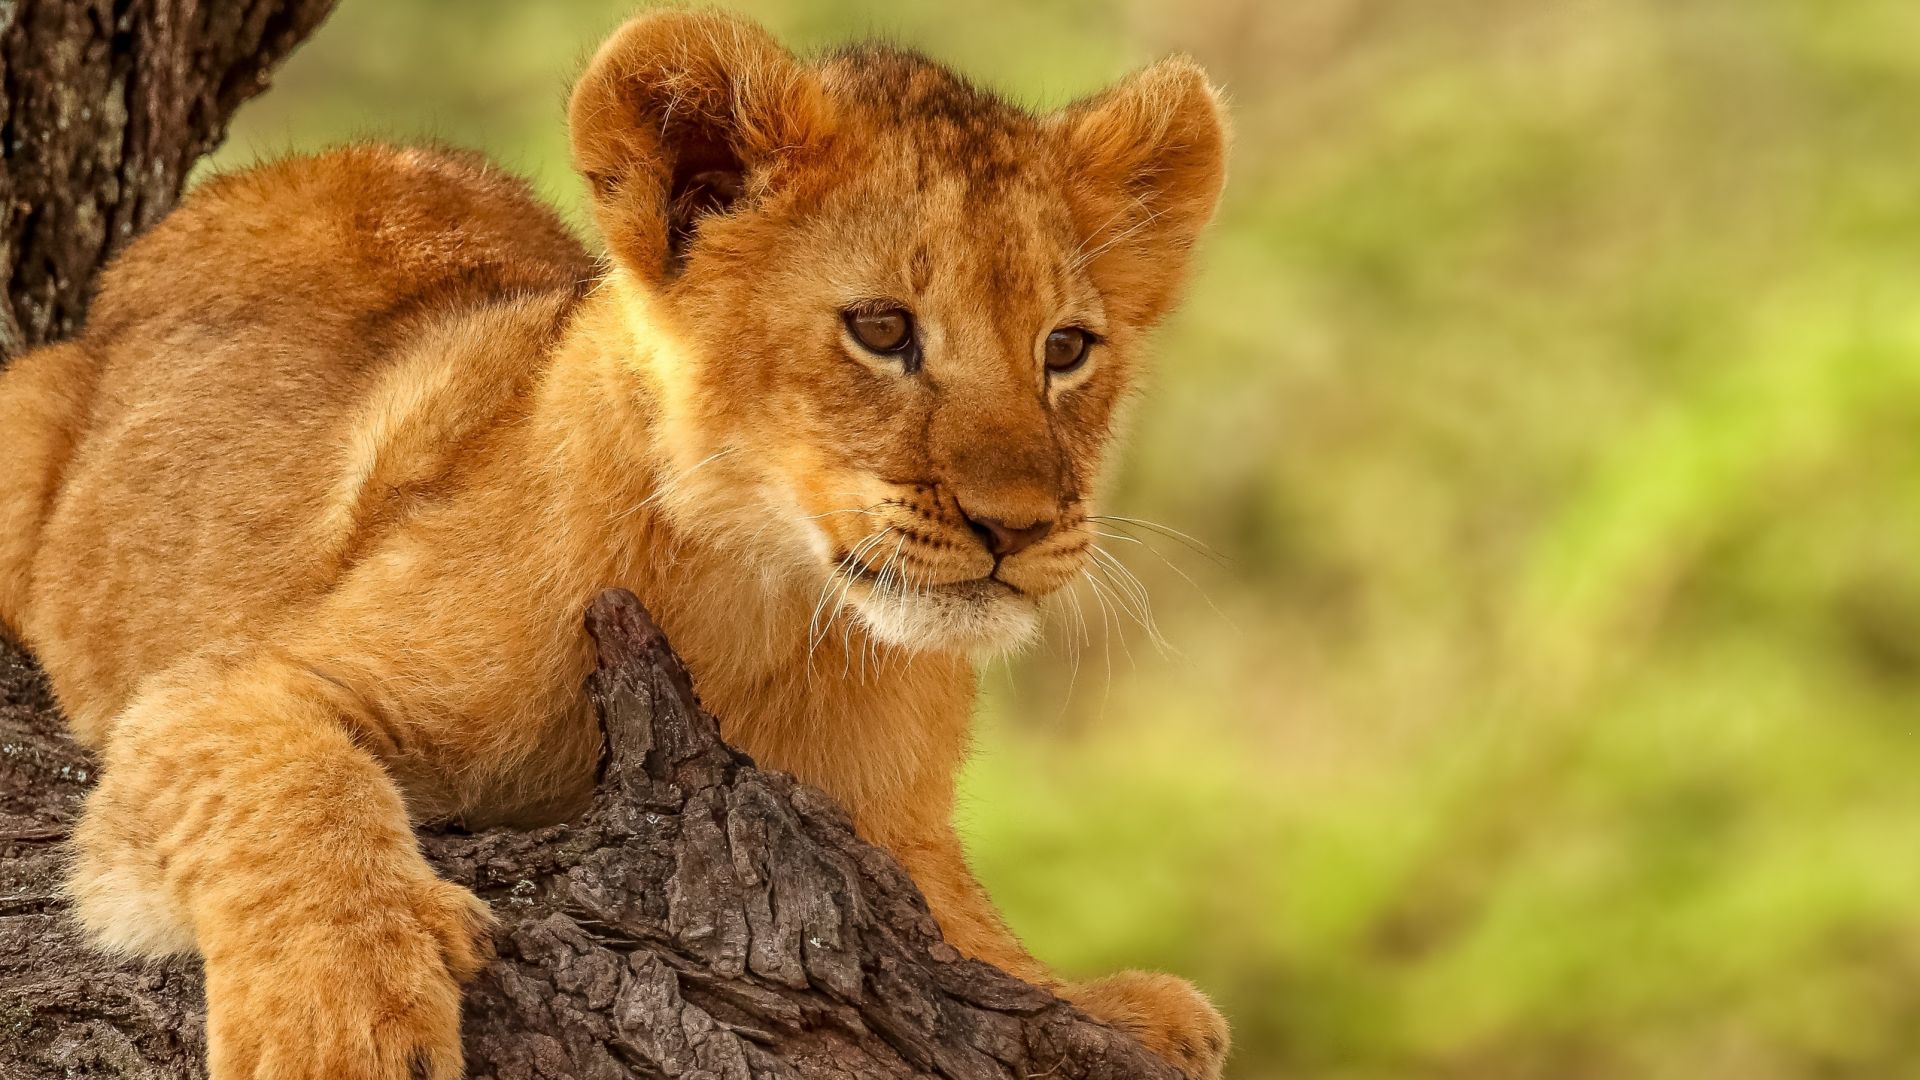 Lion cub, cute, animal wallpaper, HD image, picture, background, 51c2ab